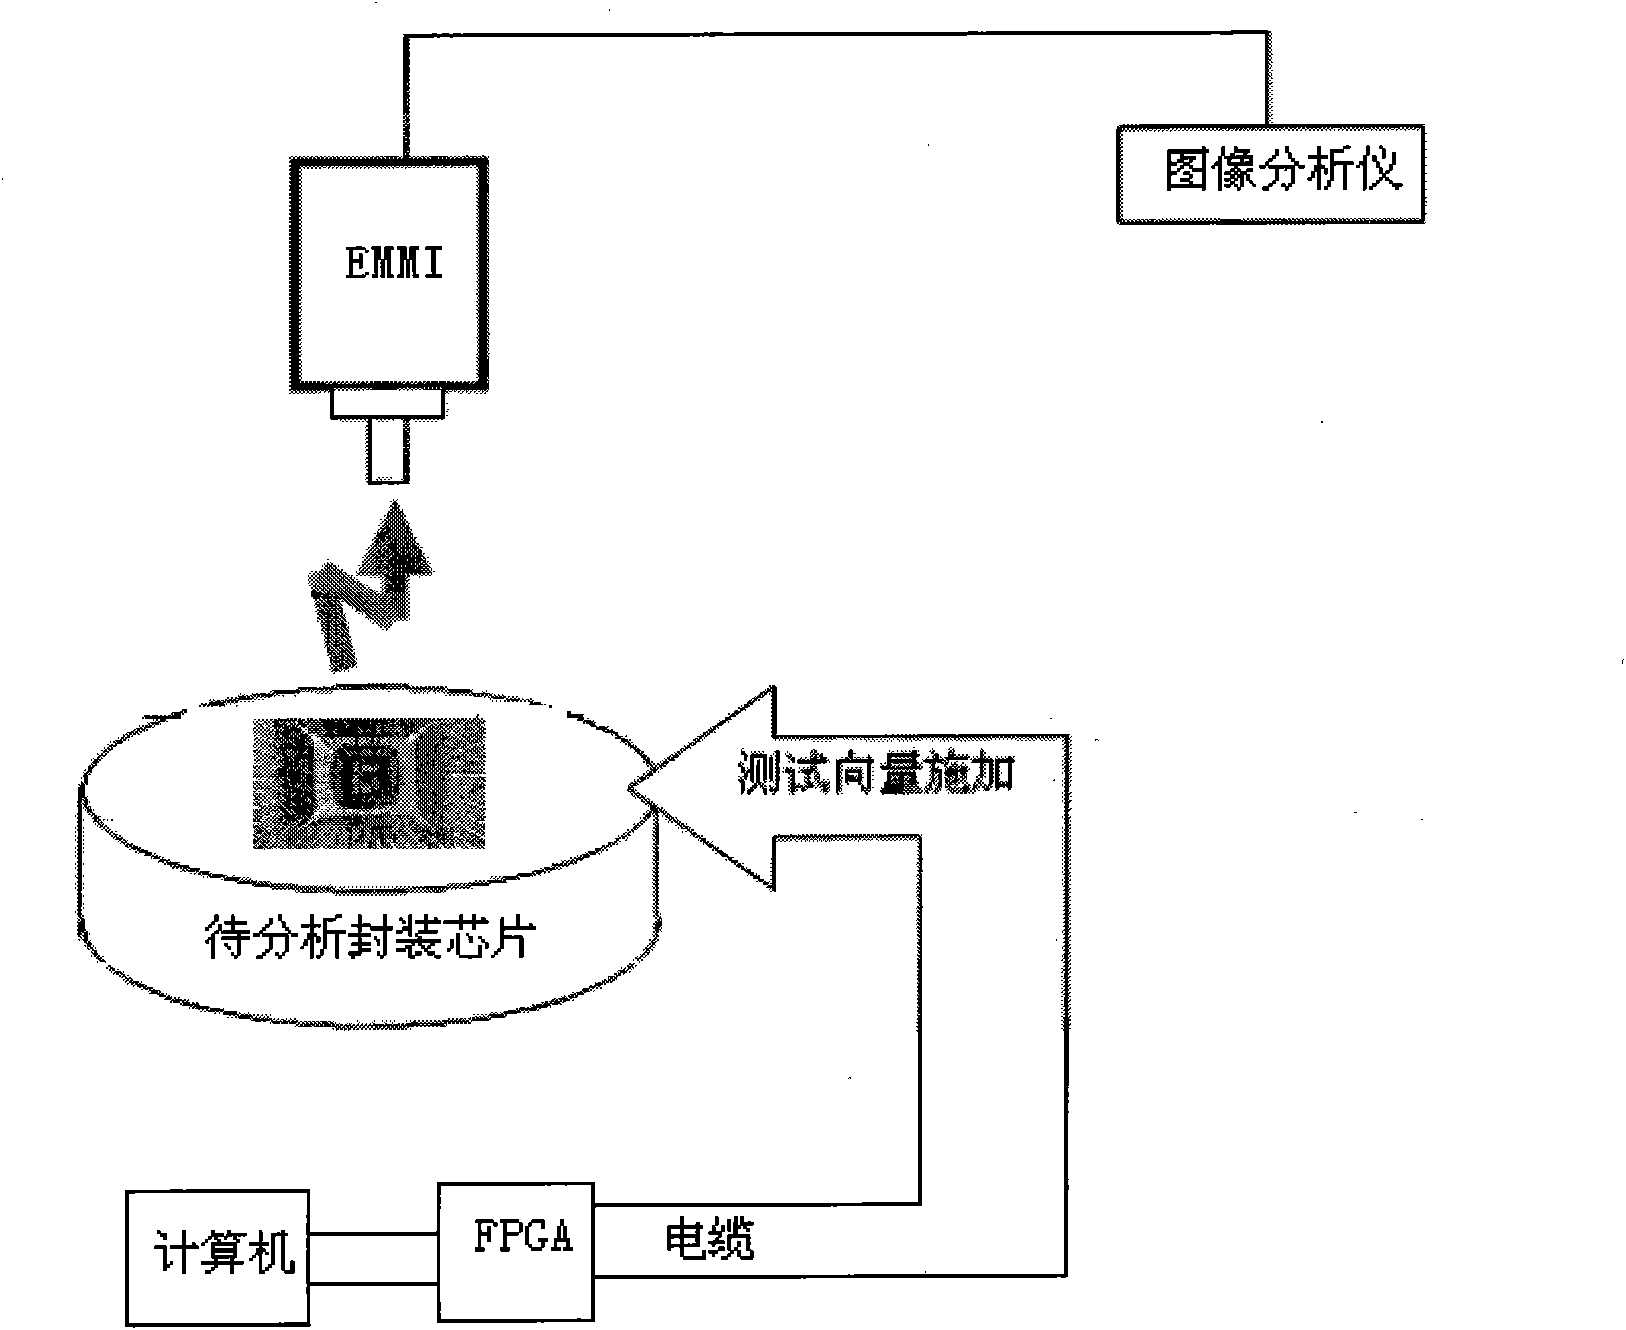 Emission microscope chip failure analyzing method and system